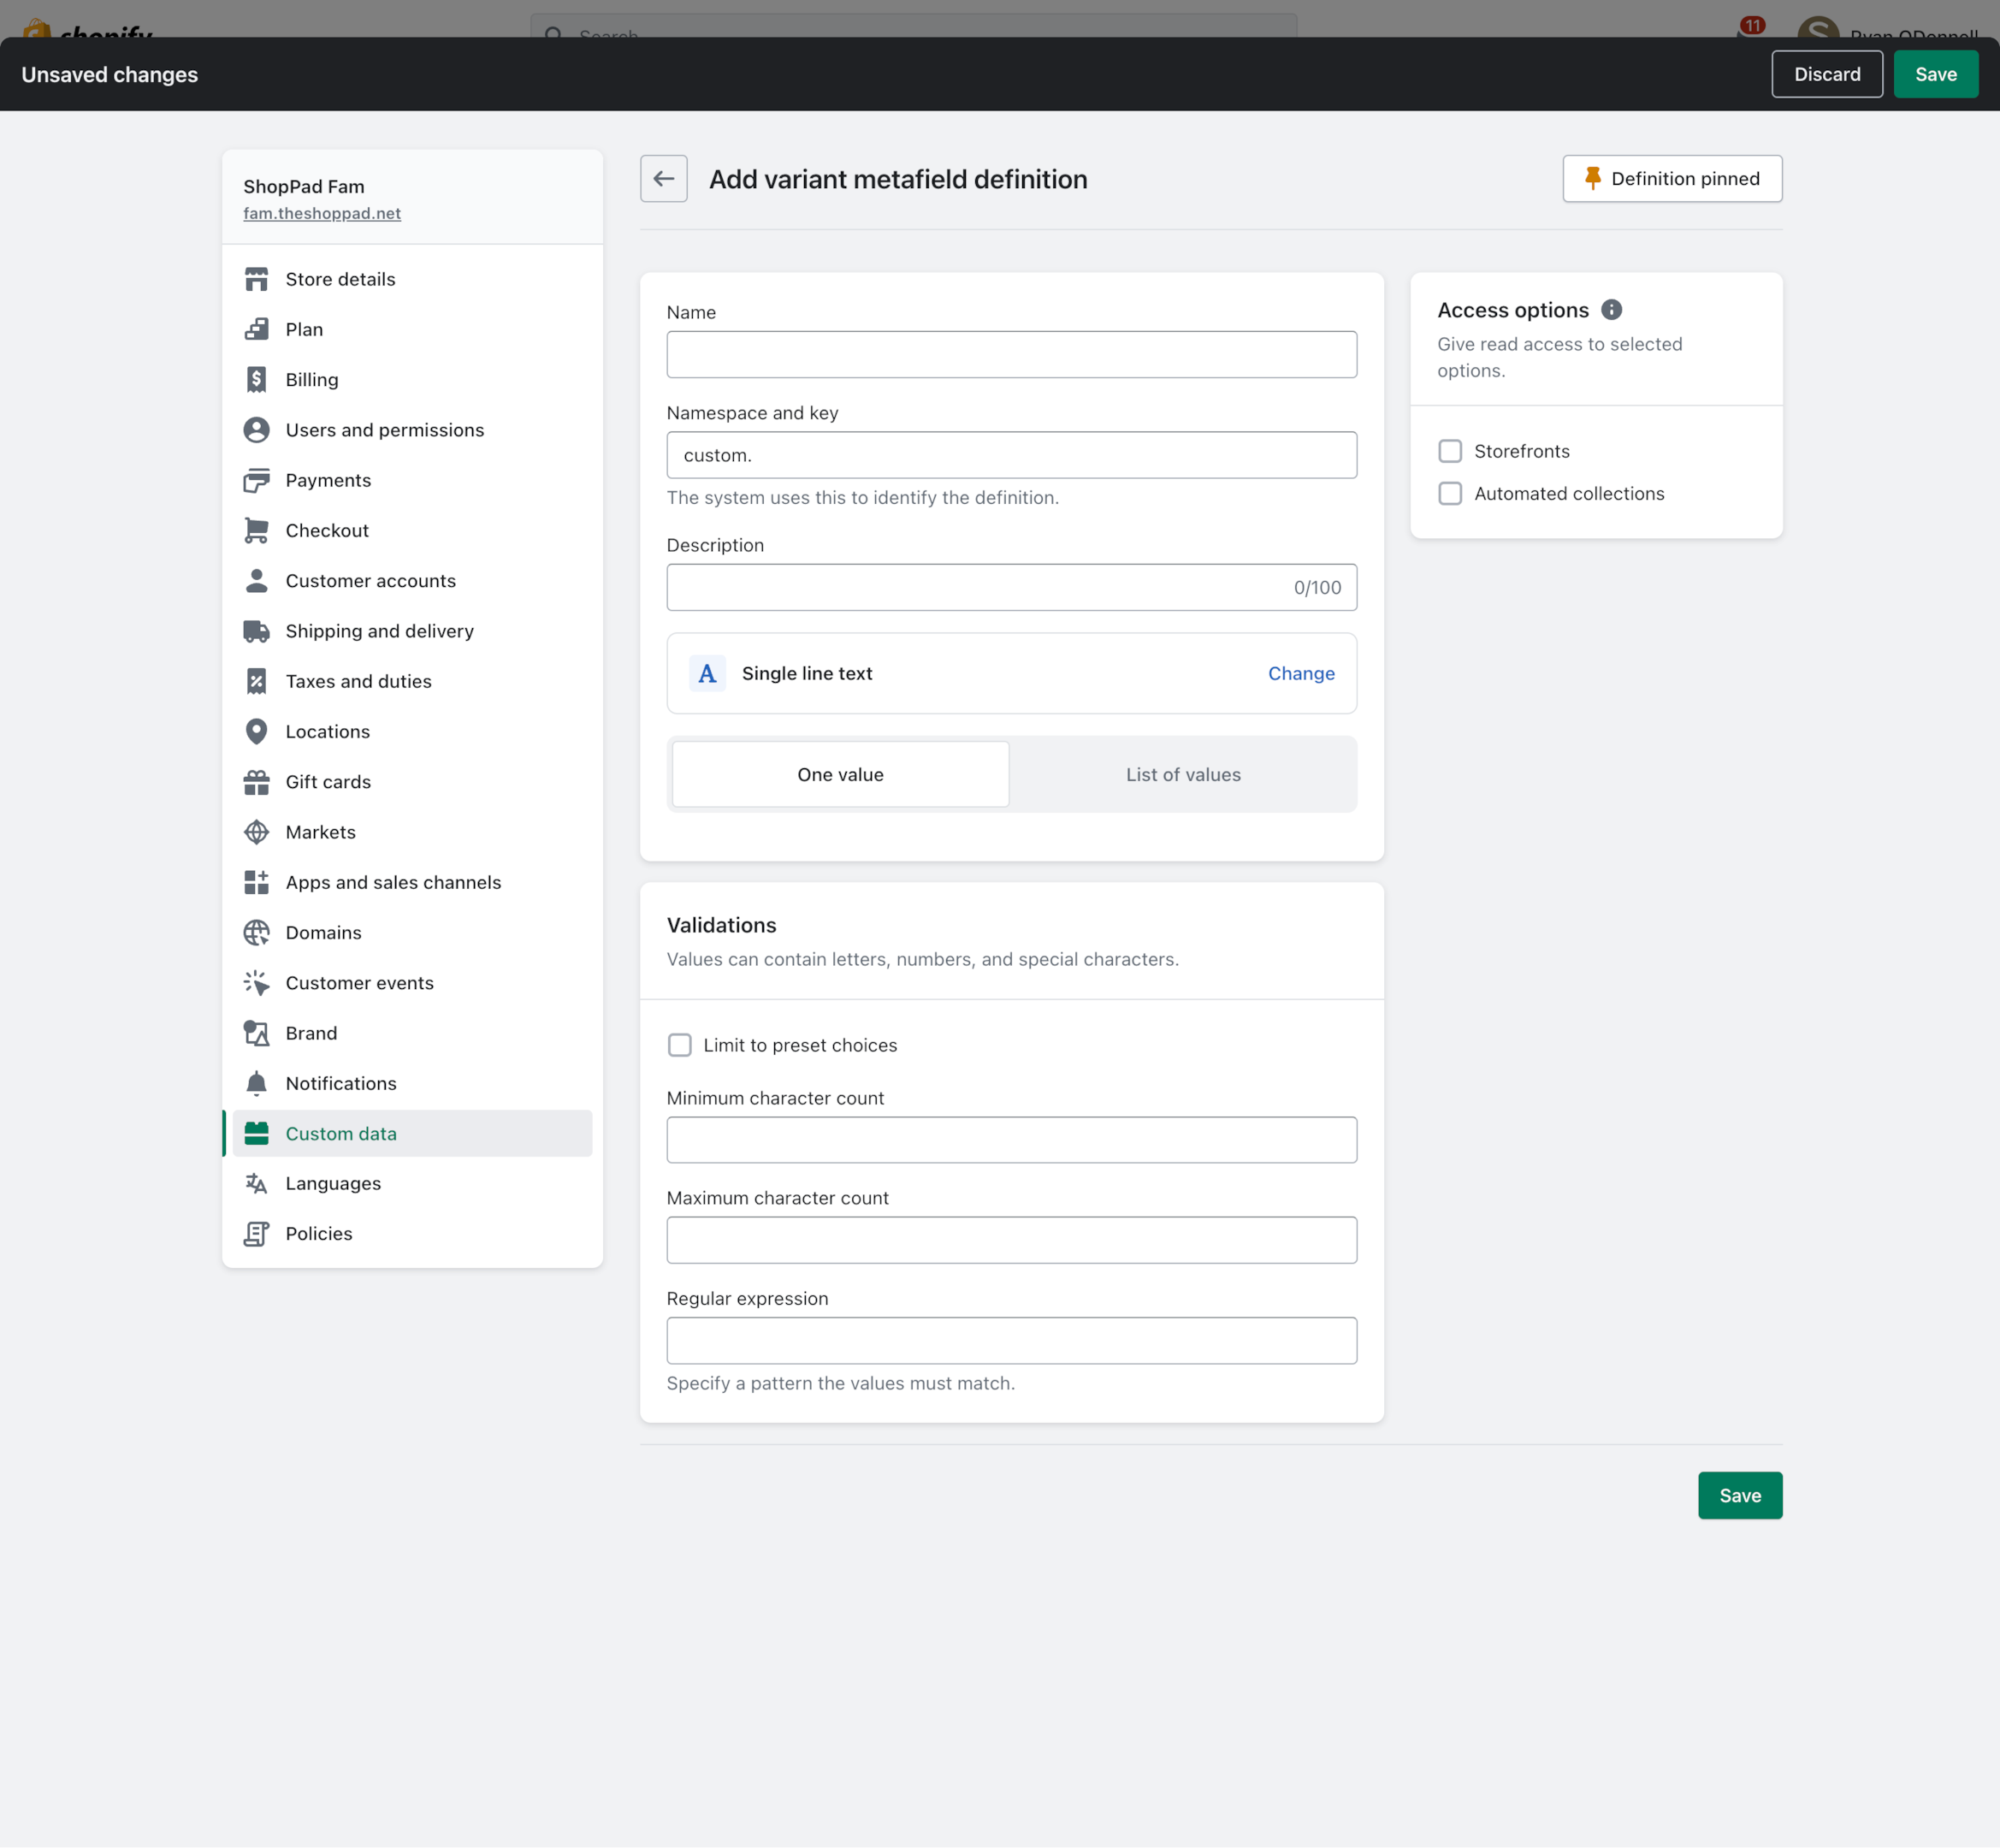 Setting up a variant metafield in the Shopify admin